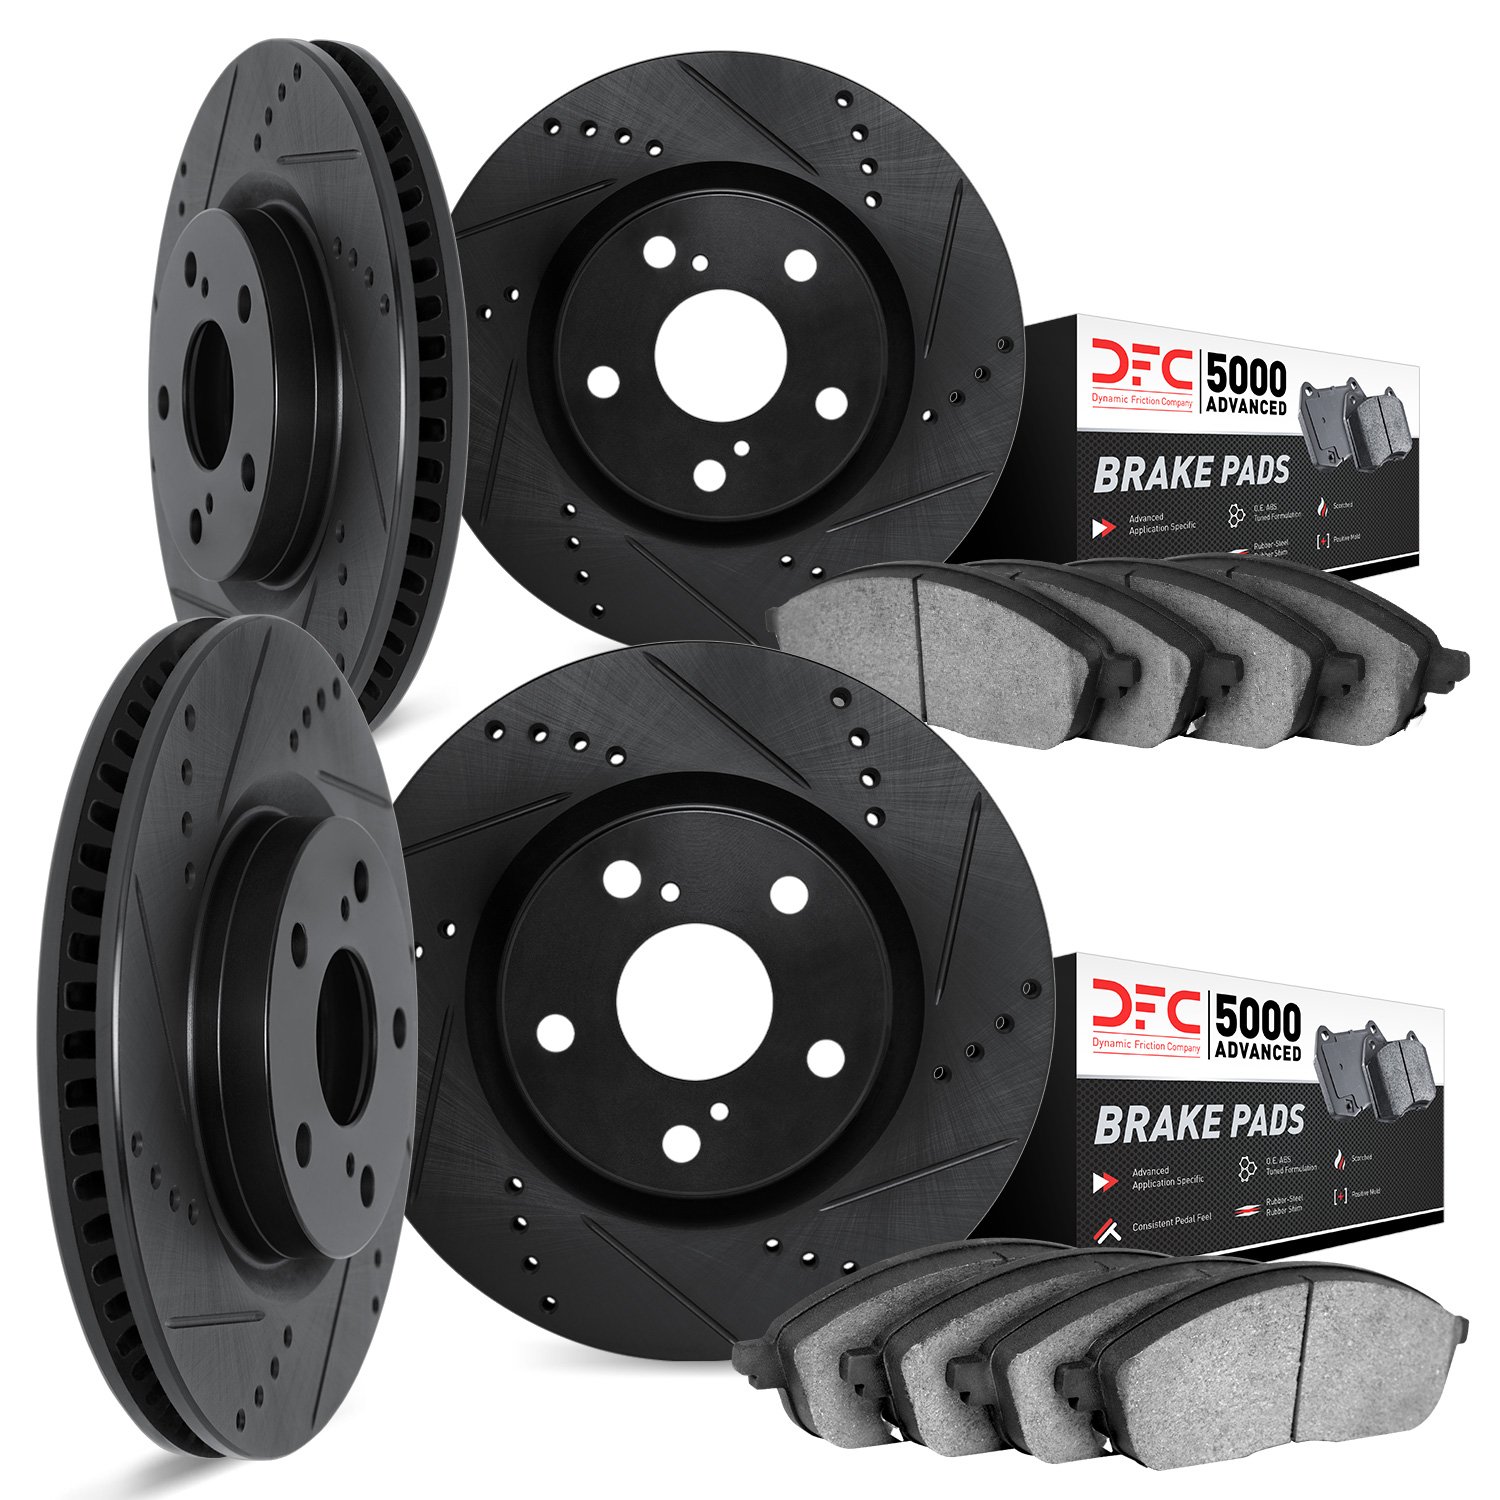 8504-75004 Drilled/Slotted Brake Rotors w/5000 Advanced Brake Pads Kit [Black], 2001-2006 Lexus/Toyota/Scion, Position: Front an